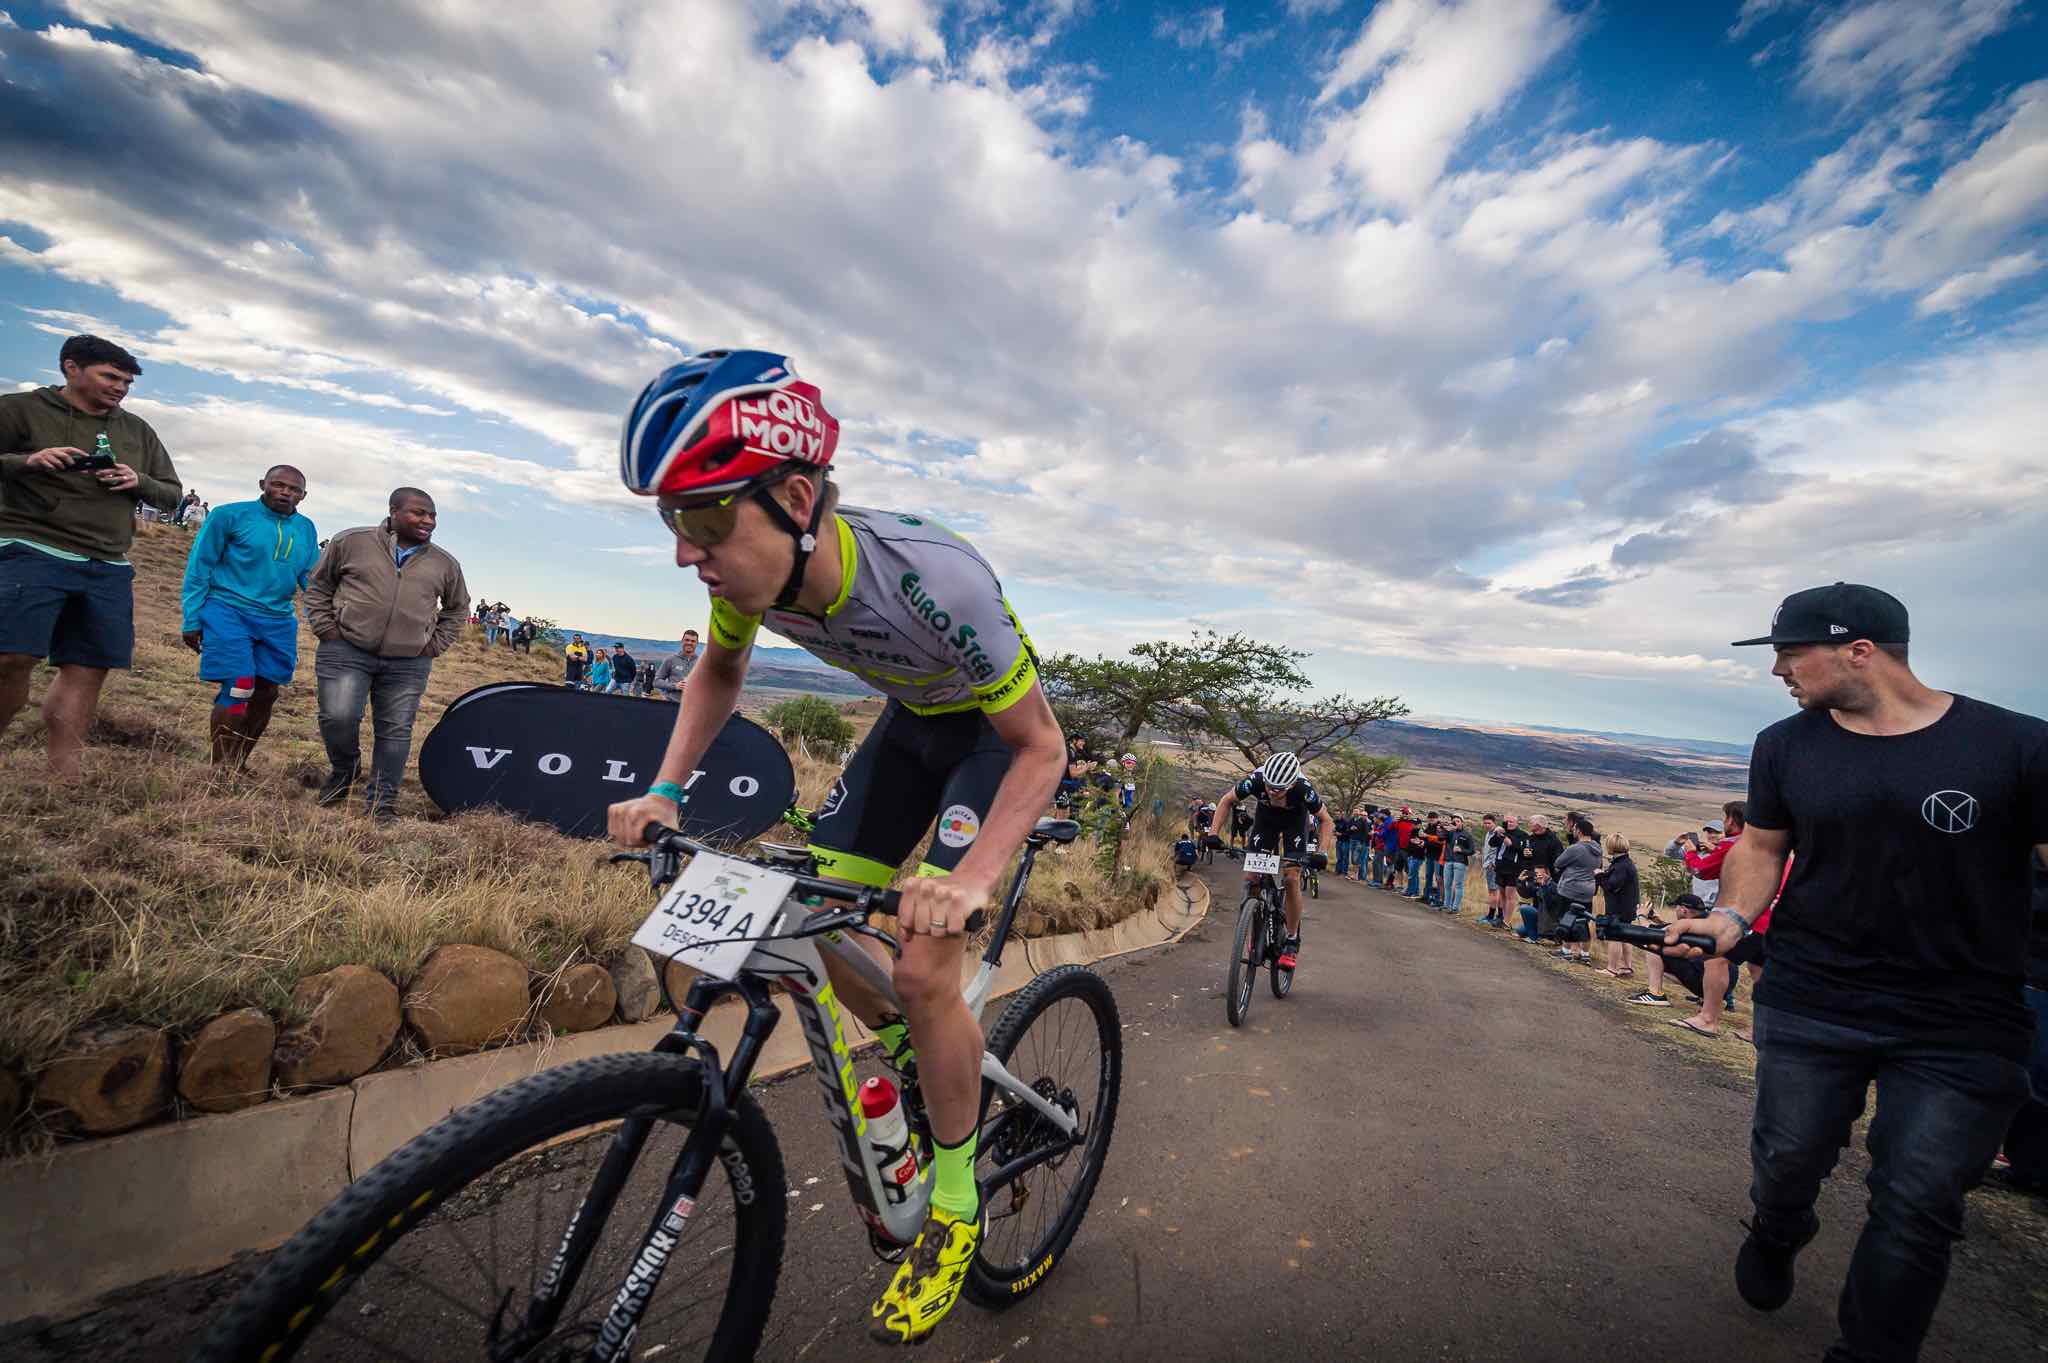 Matthys Beukes and Candice Lill conquer Spionkop